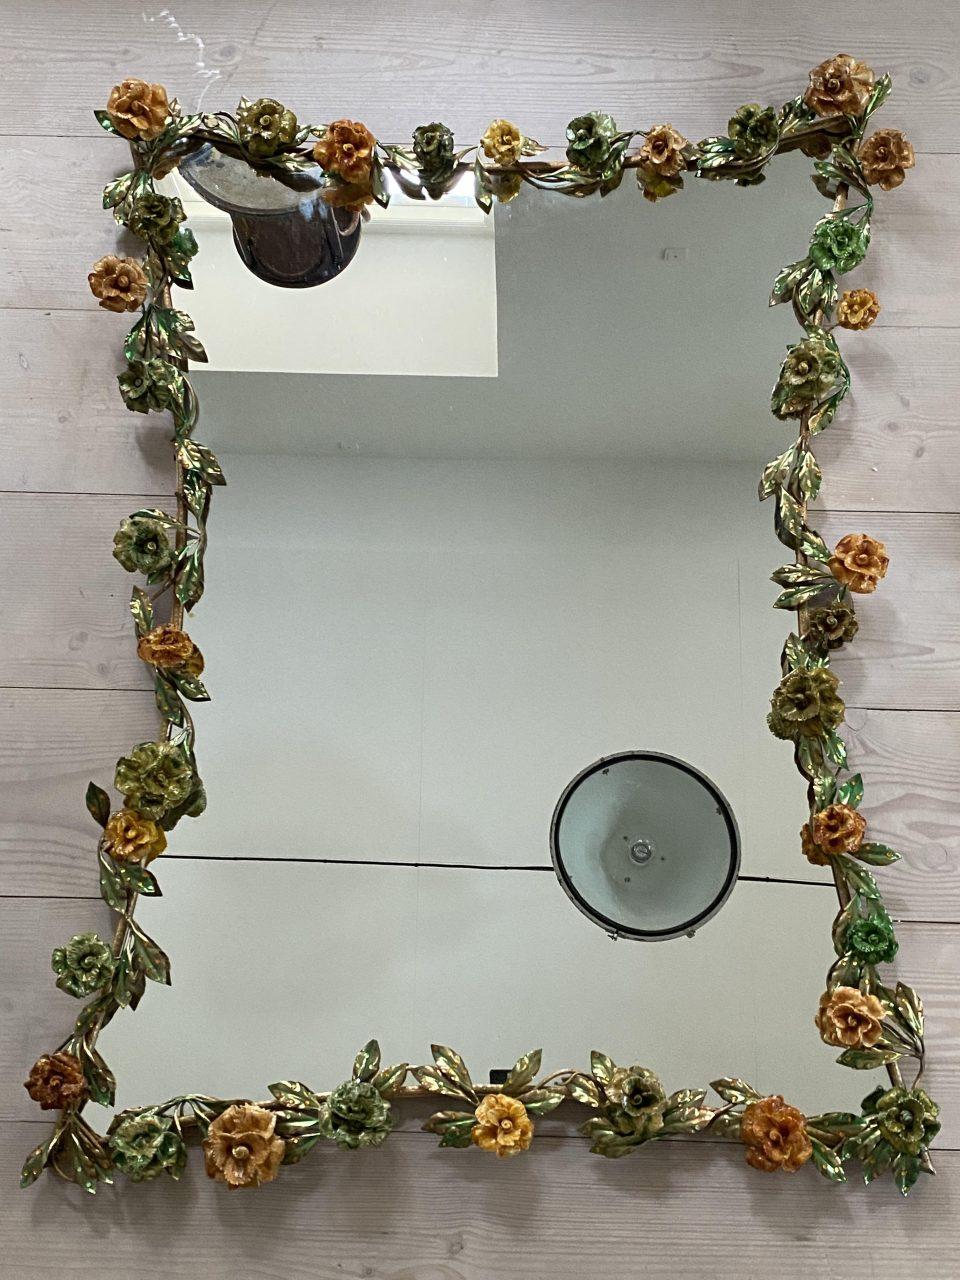 Awe inspiring and seldom found large Murano mirror, from circa 1970. Garlands of luscious flowers adorn it in colorful Venetian glass with stunning and charming mouth-blown glass flowers and green leaves along the frame.

An extremely imaginative